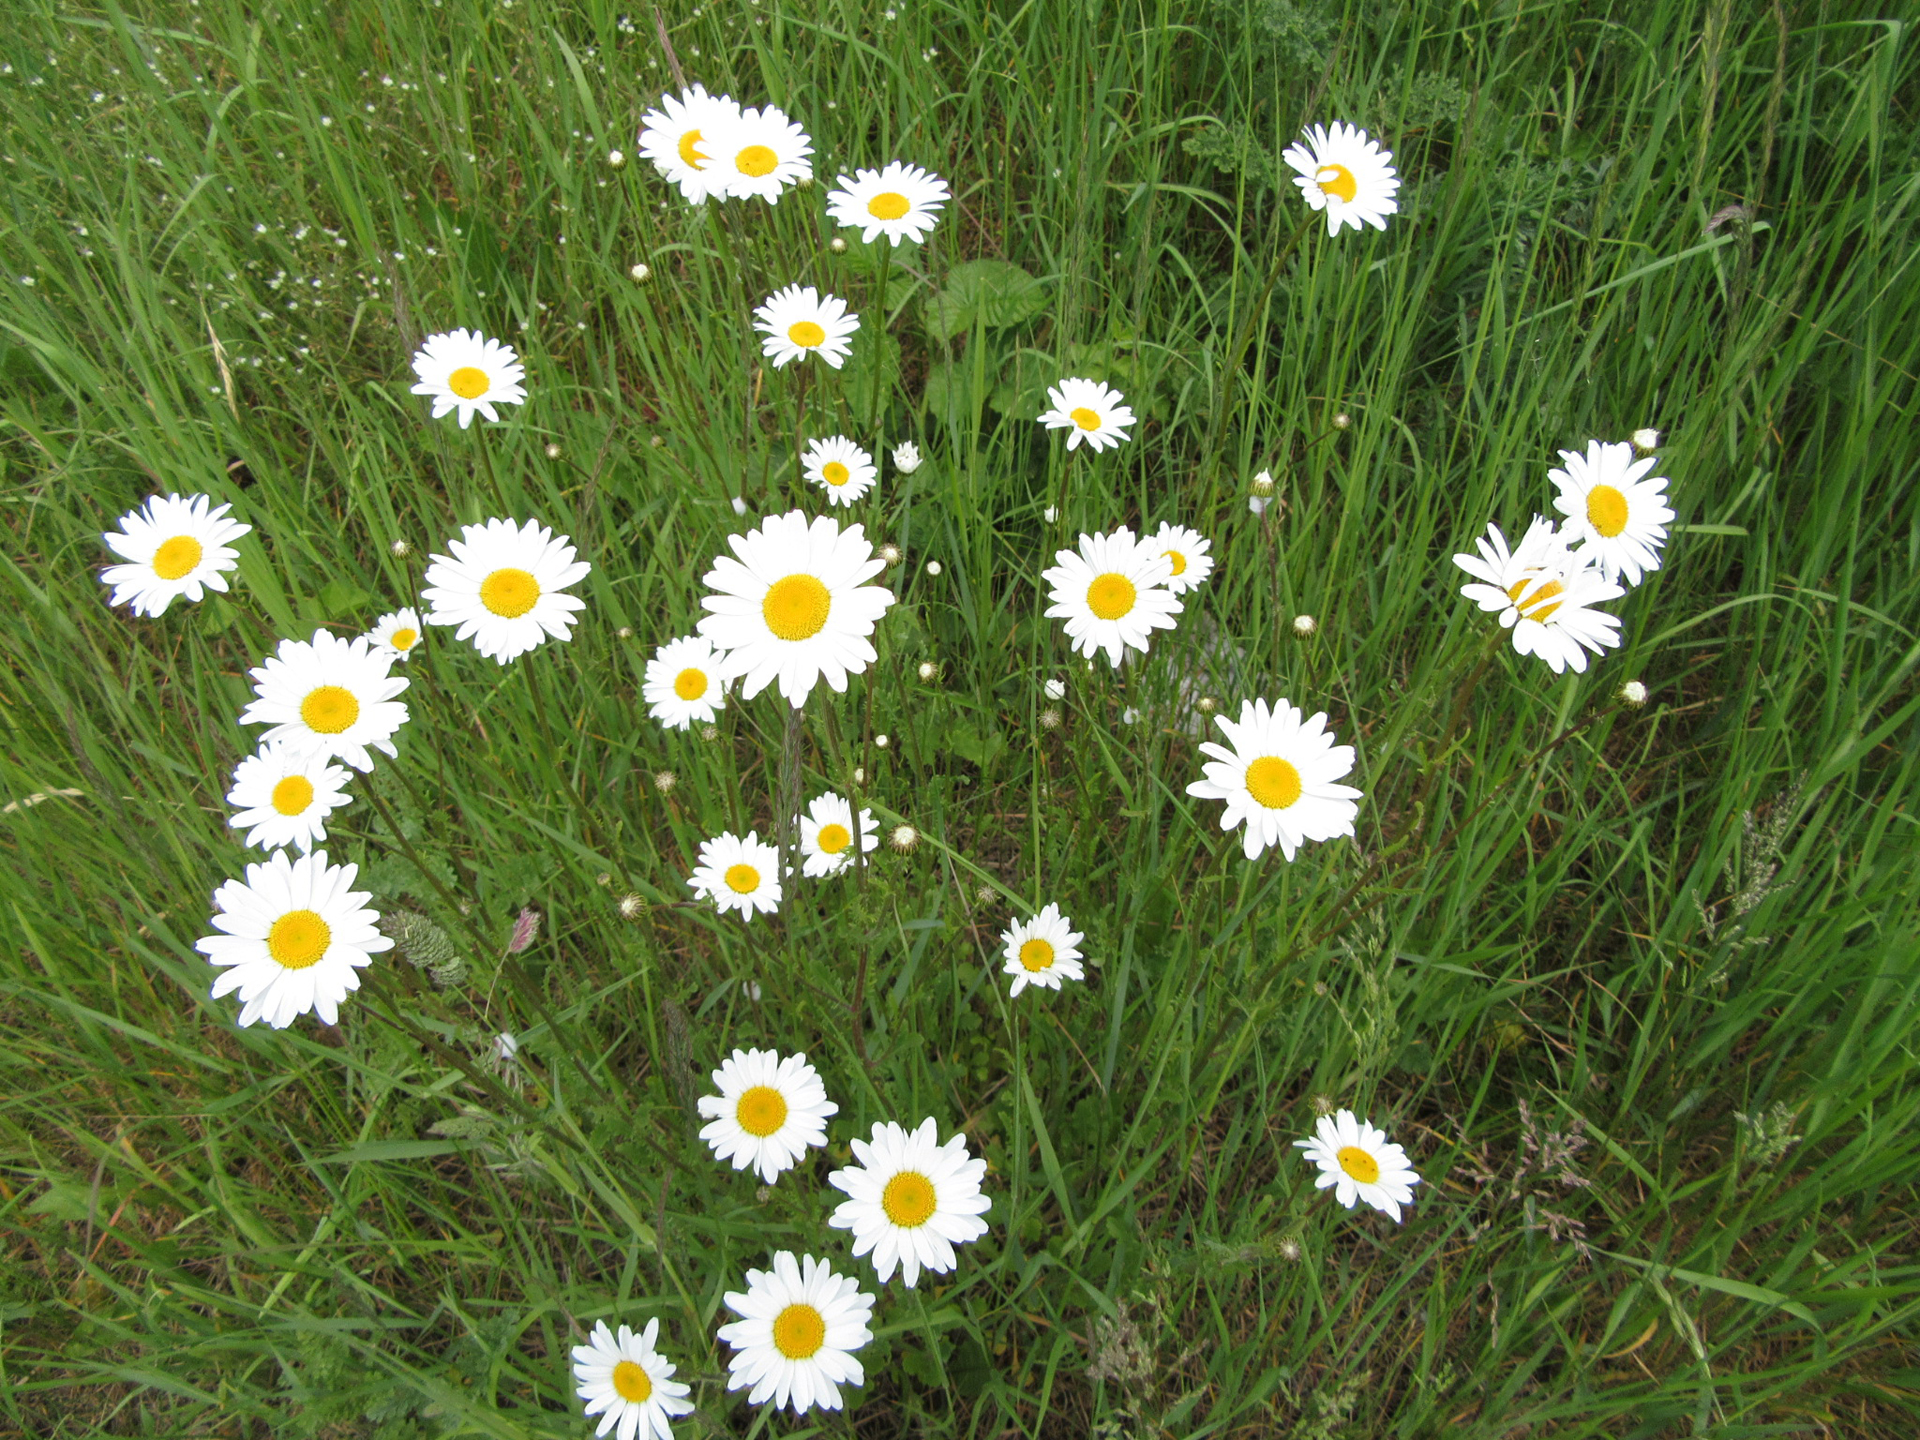 Daisy-Chained Summers – Poetry of Childhood